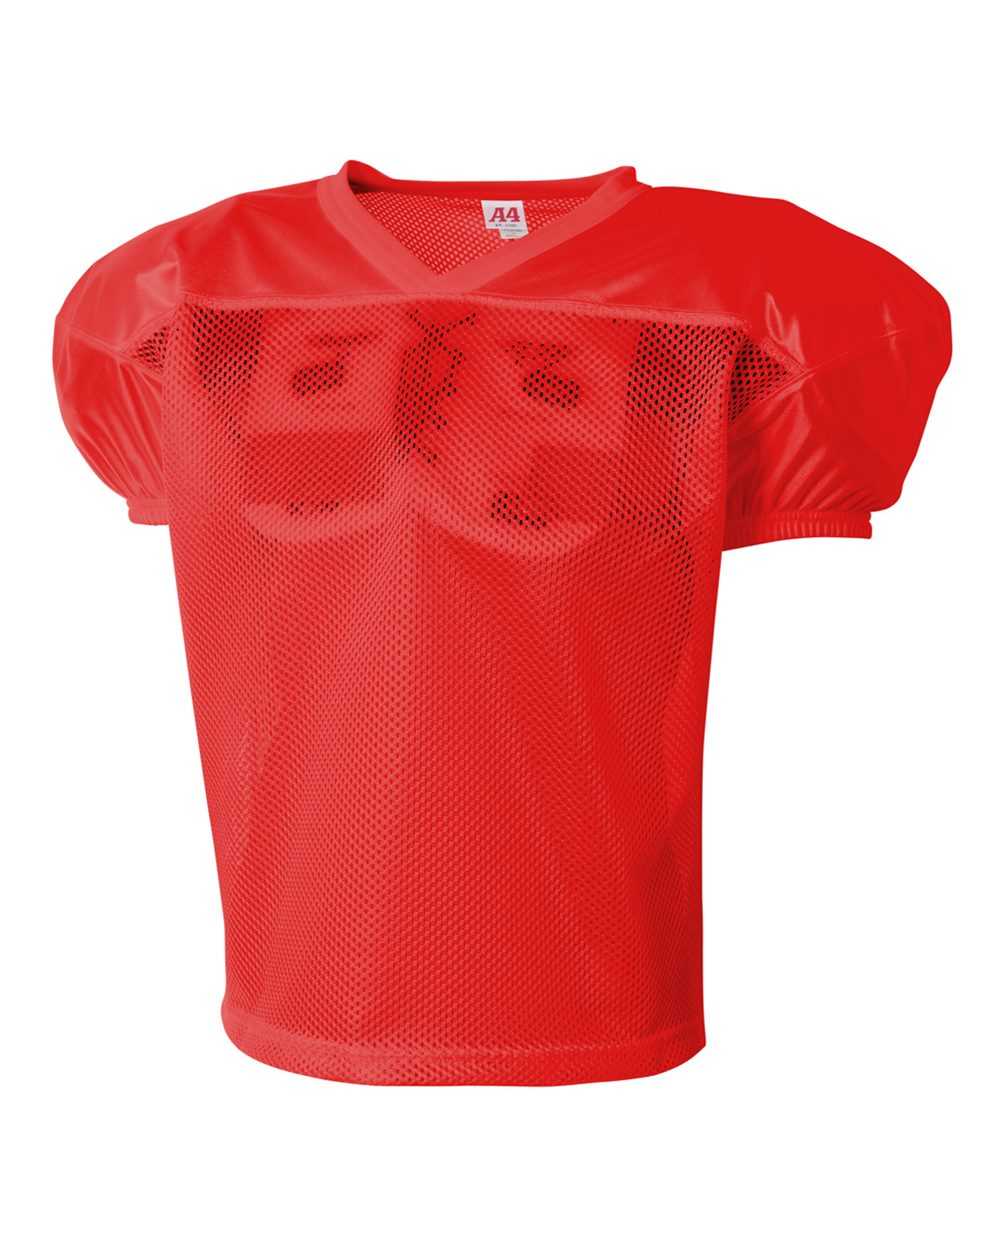 A4 NB4260 Youth Drills Practice Jersey - Scarlet - HIT a Double